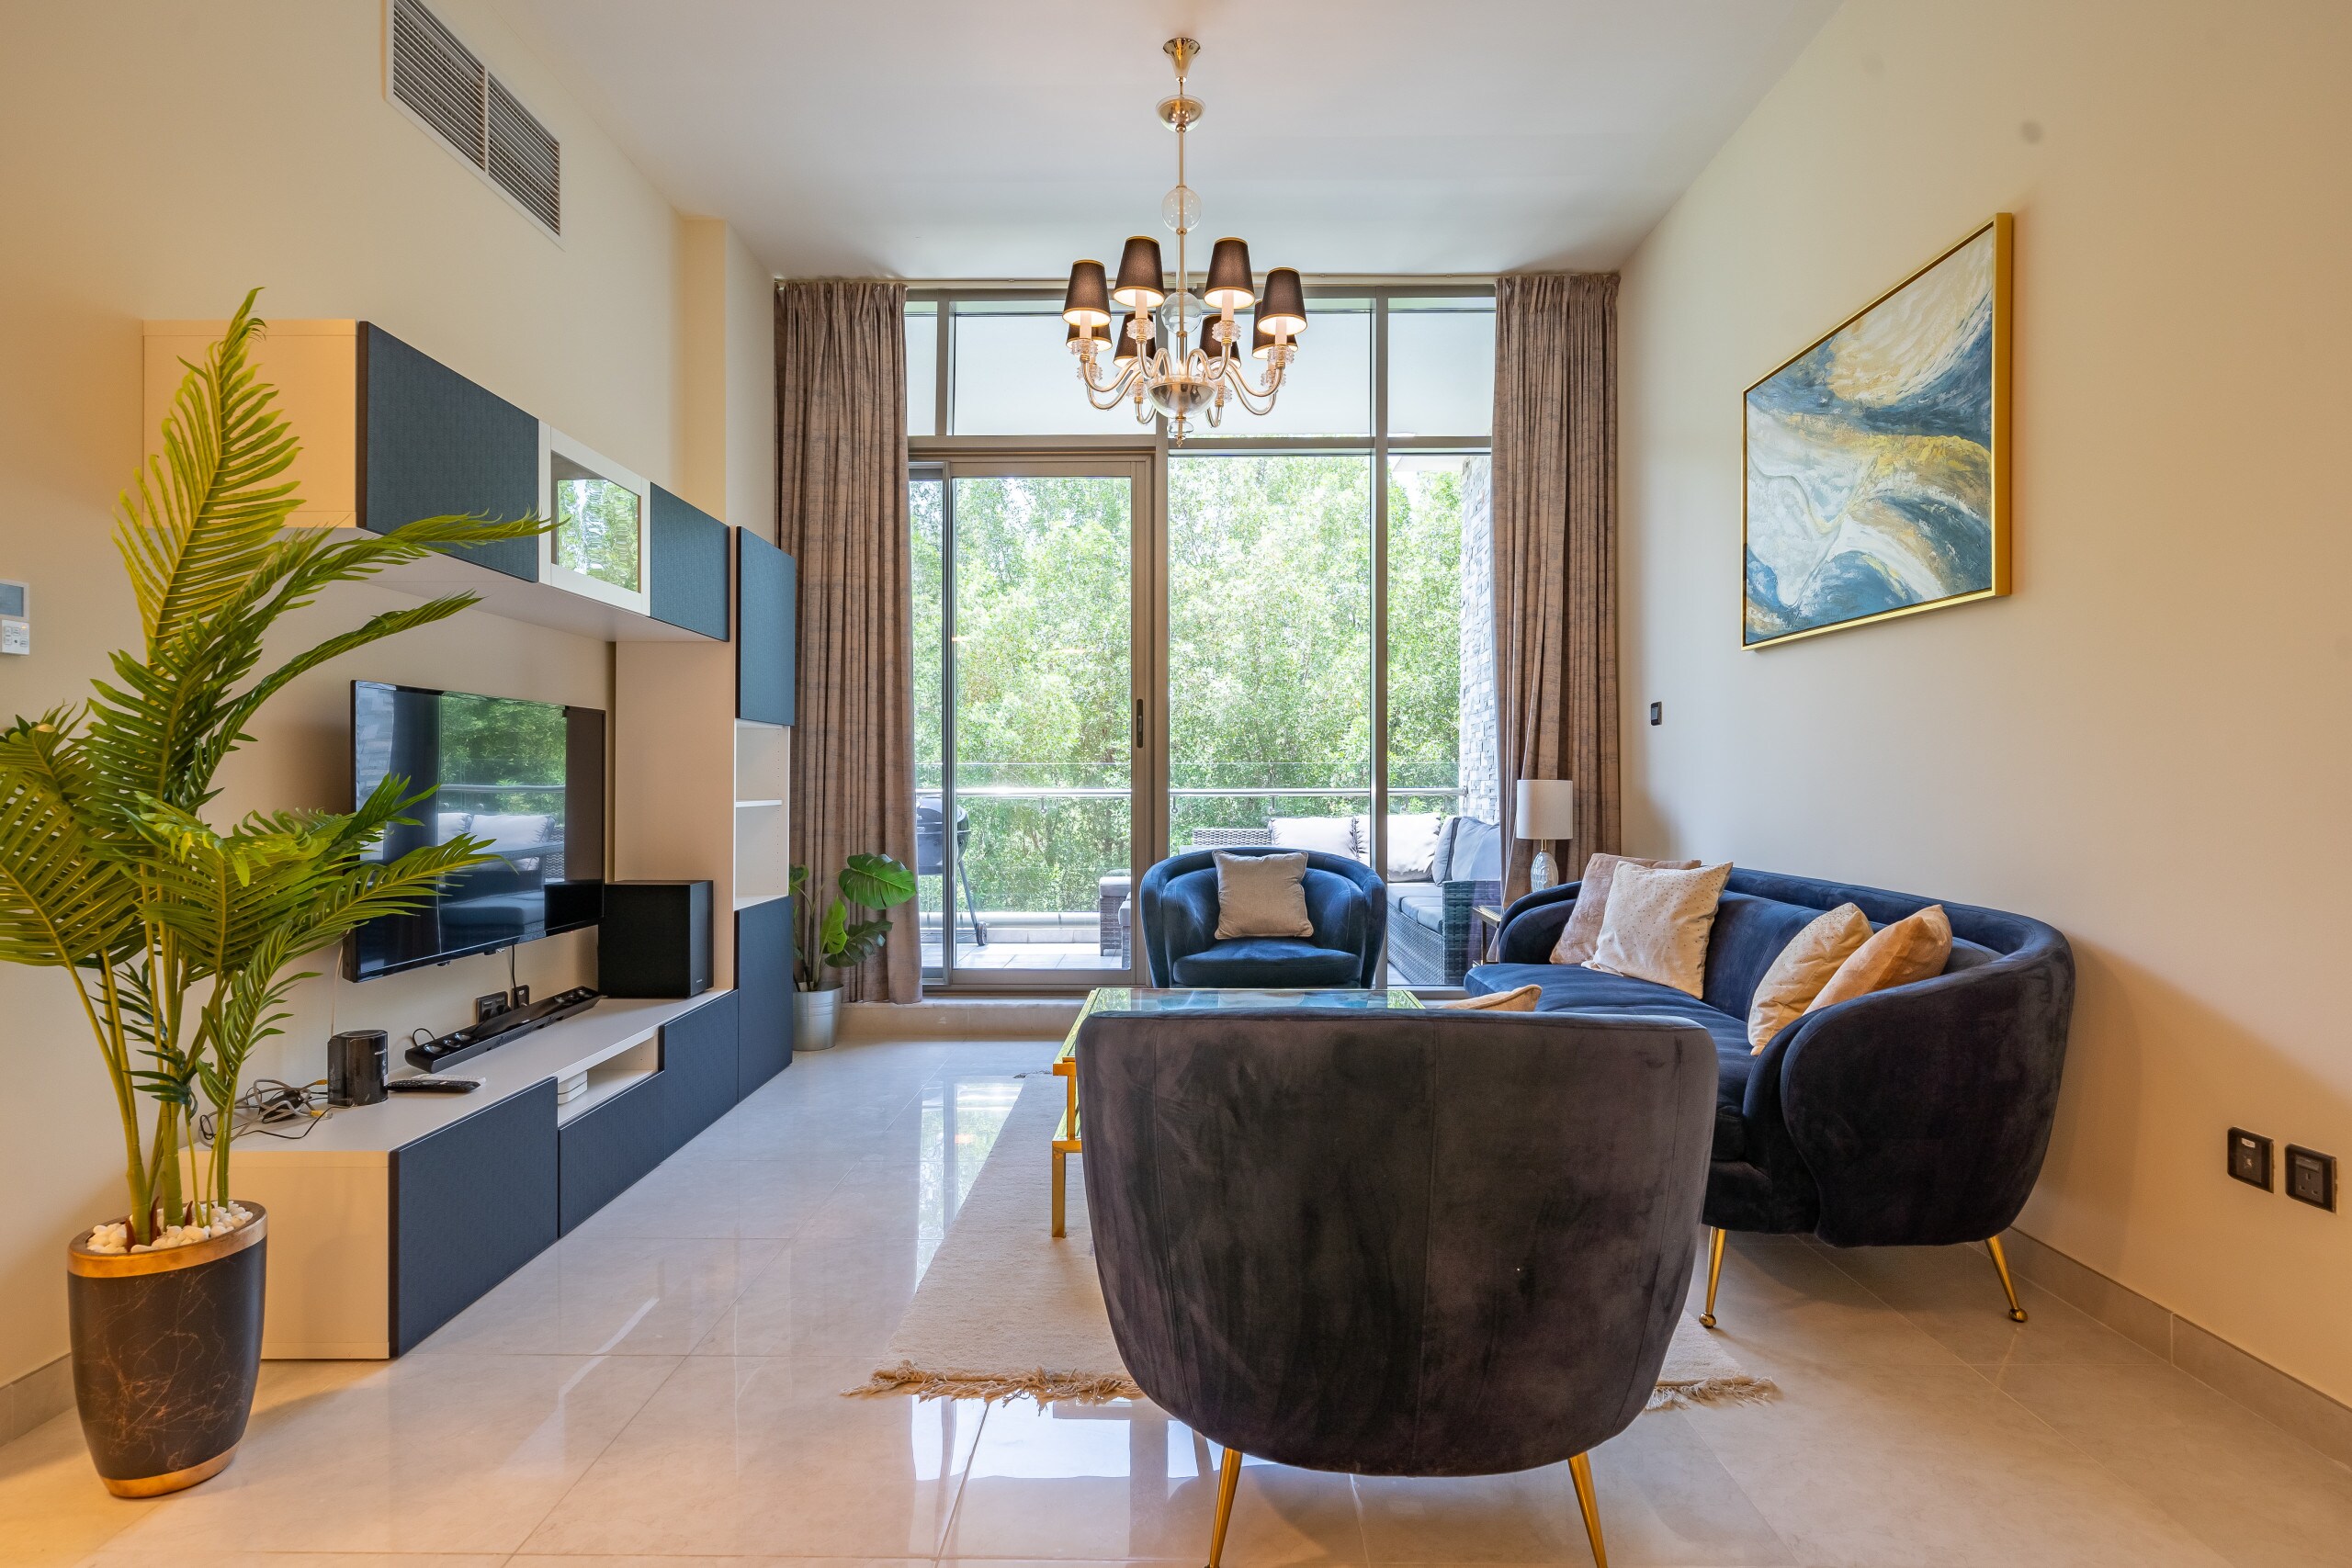 Property Image 2 - Exquisitely designed contemporary flat surrounded by lush greenery